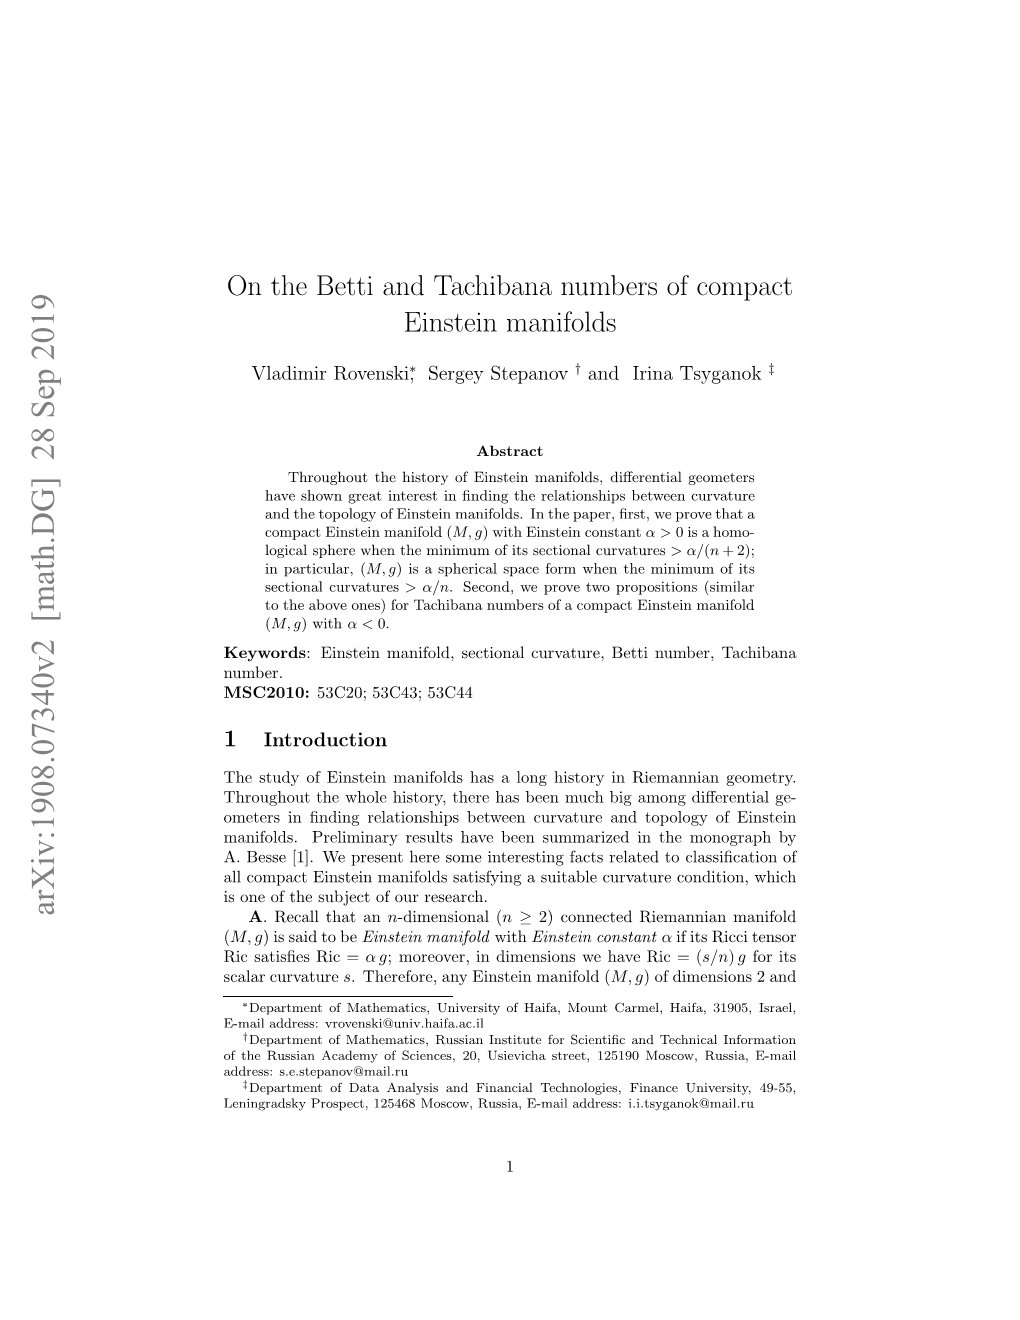 On the Betti and Tachibana Numbers of Compact Einstein Manifolds